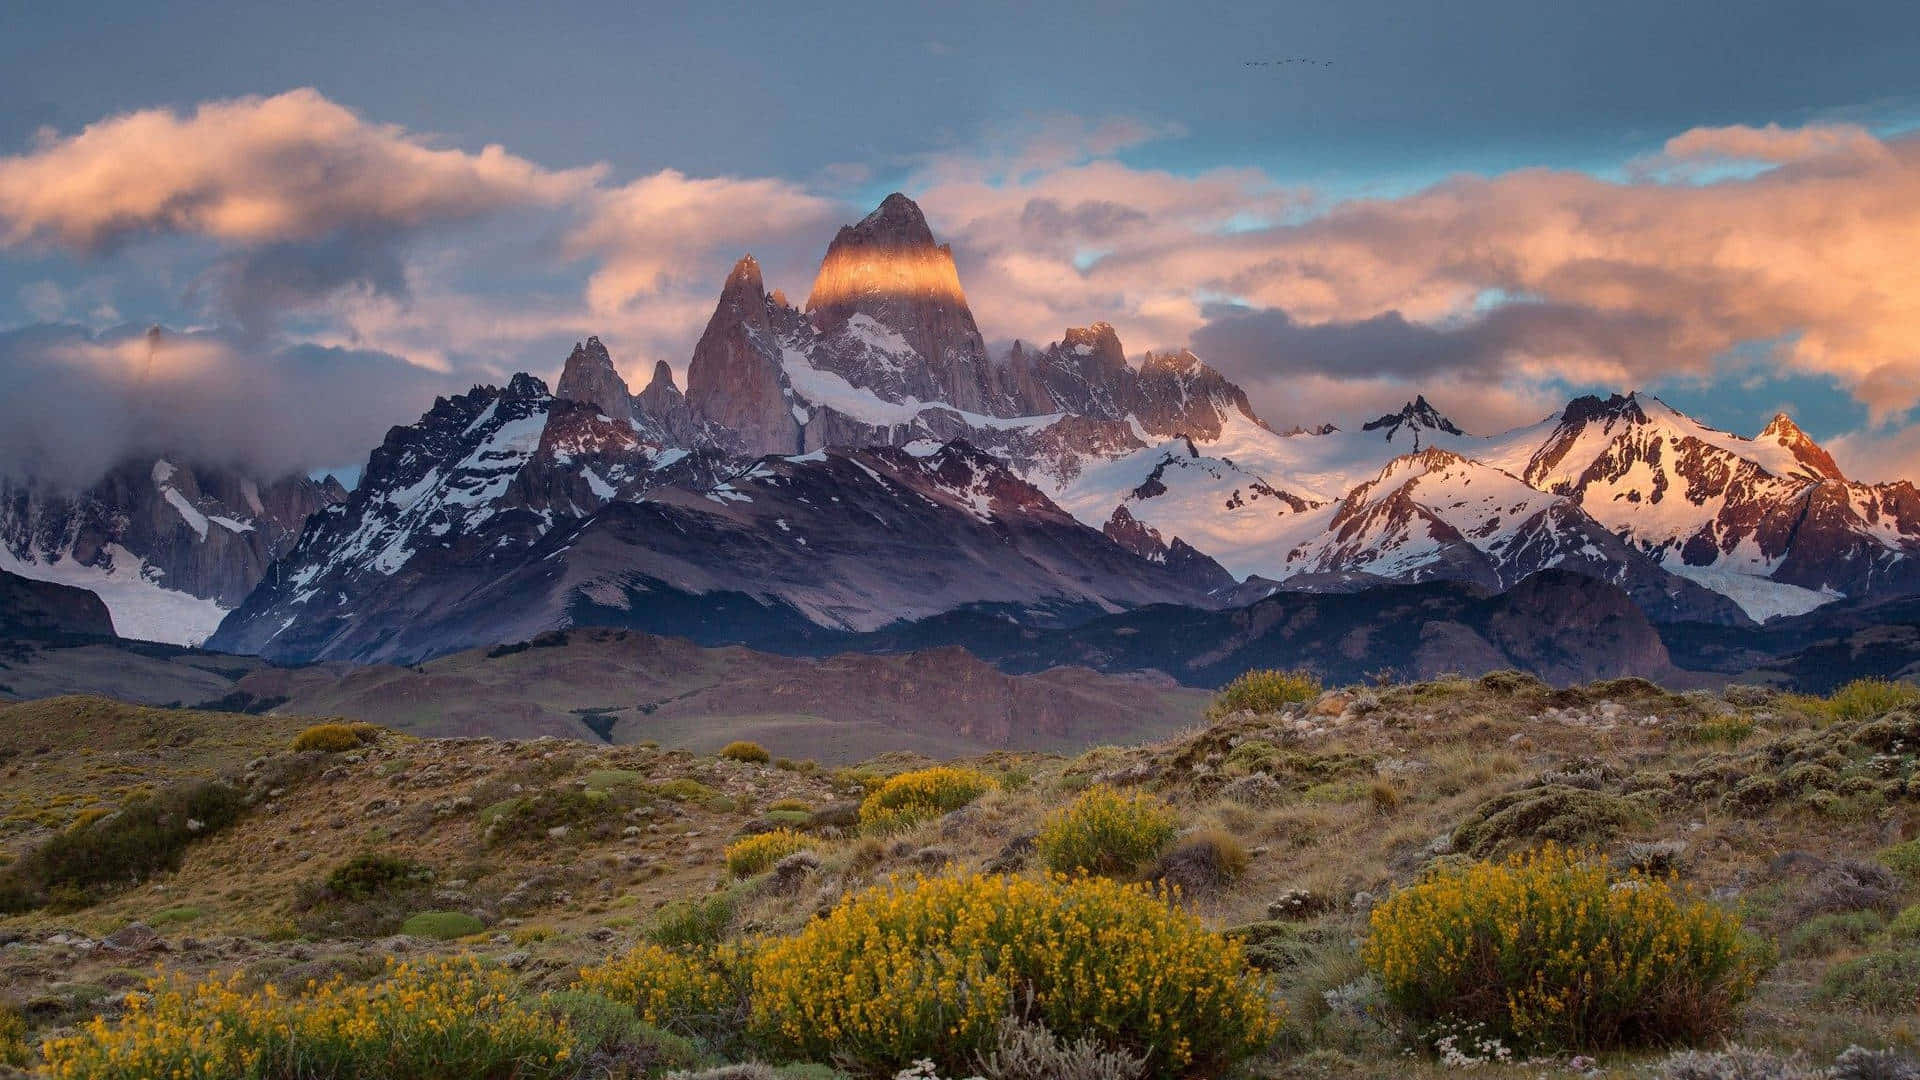 Explore the beauty and wonders of Patagonia.